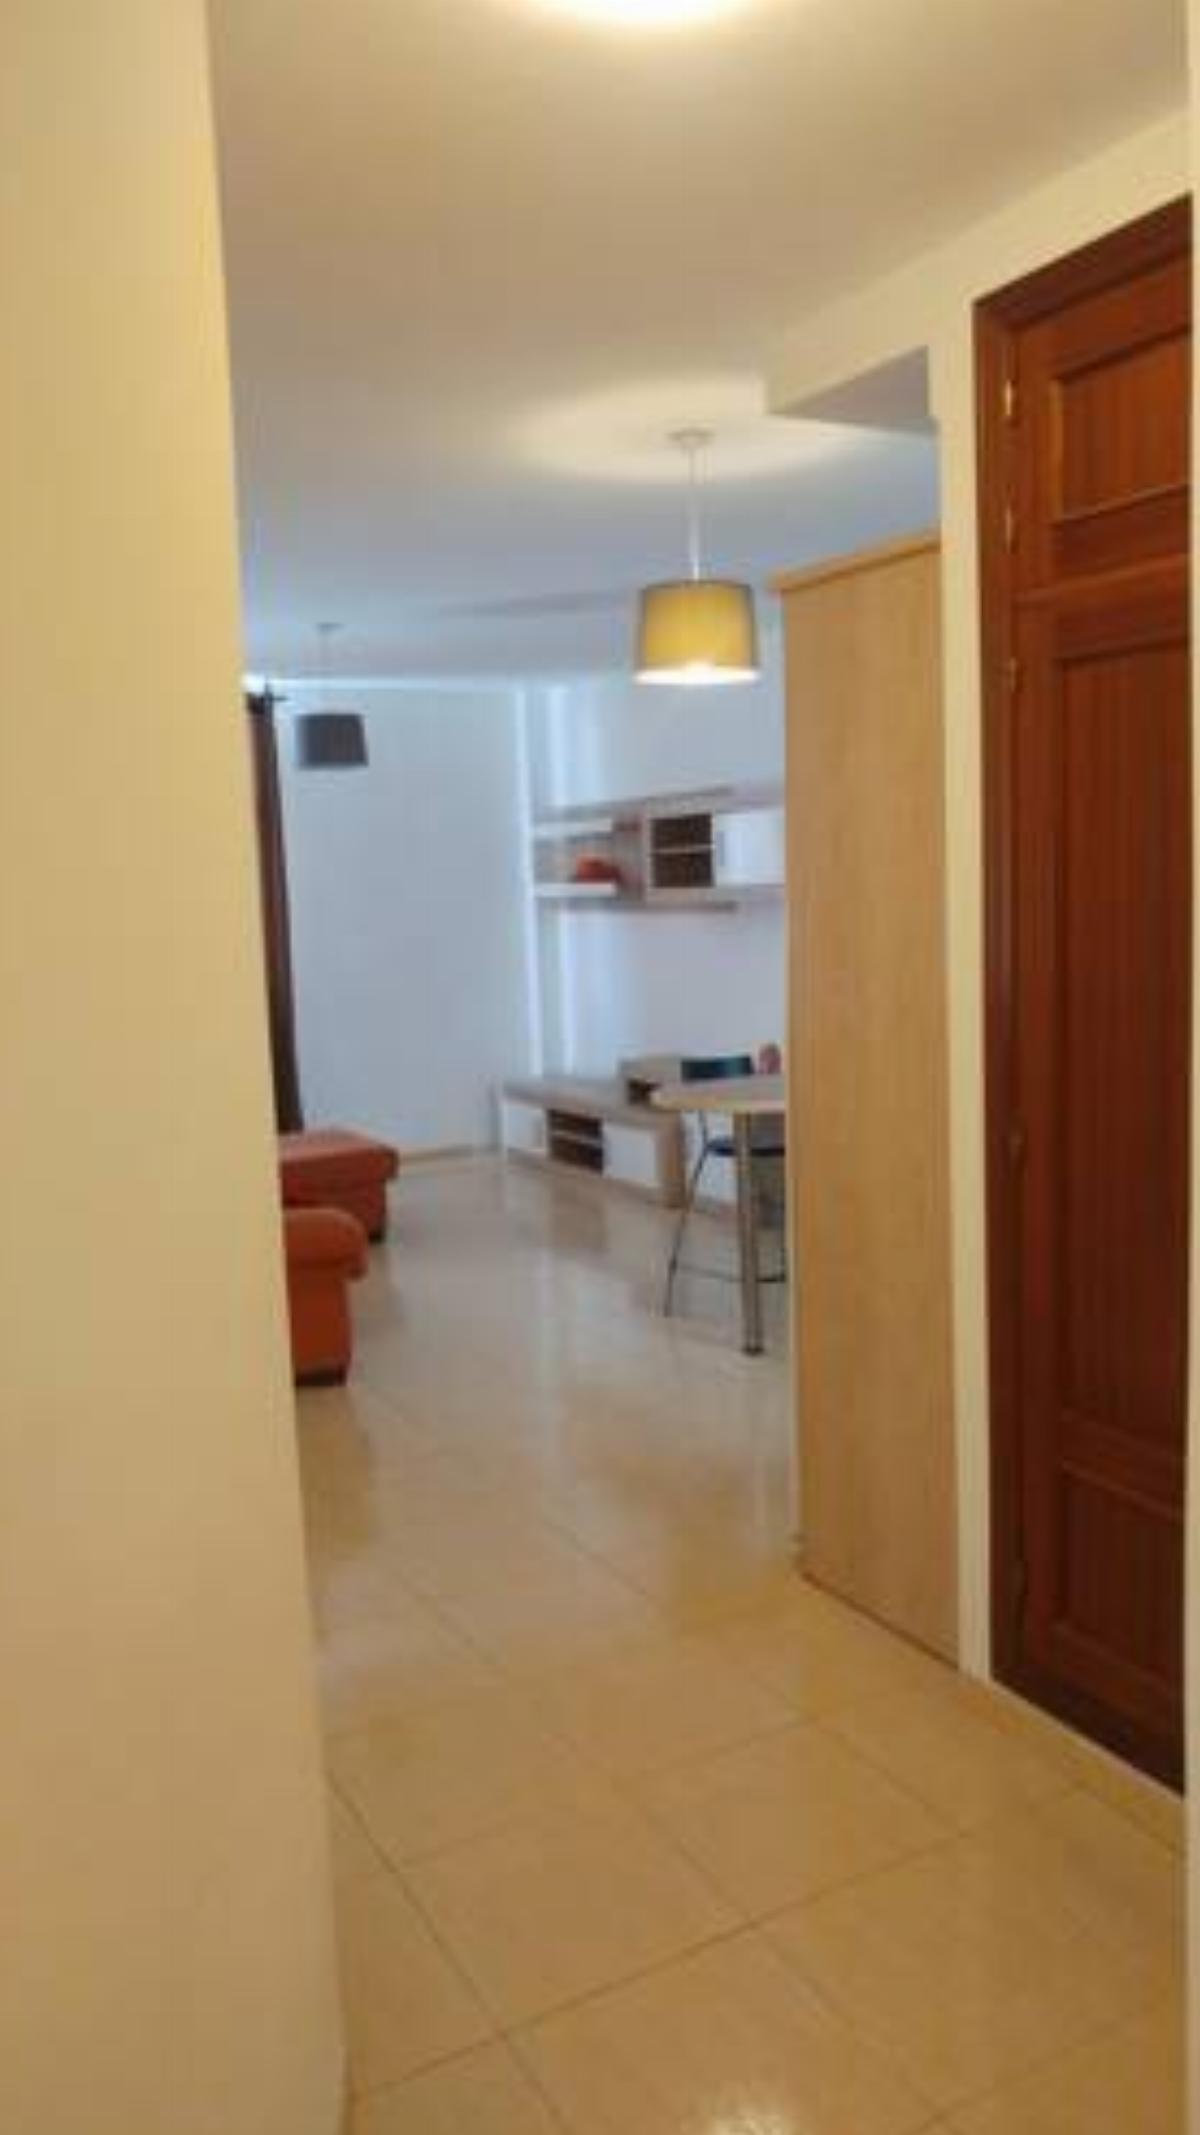 Lovely apartment for best holiday Hotel Golf del Sur Spain